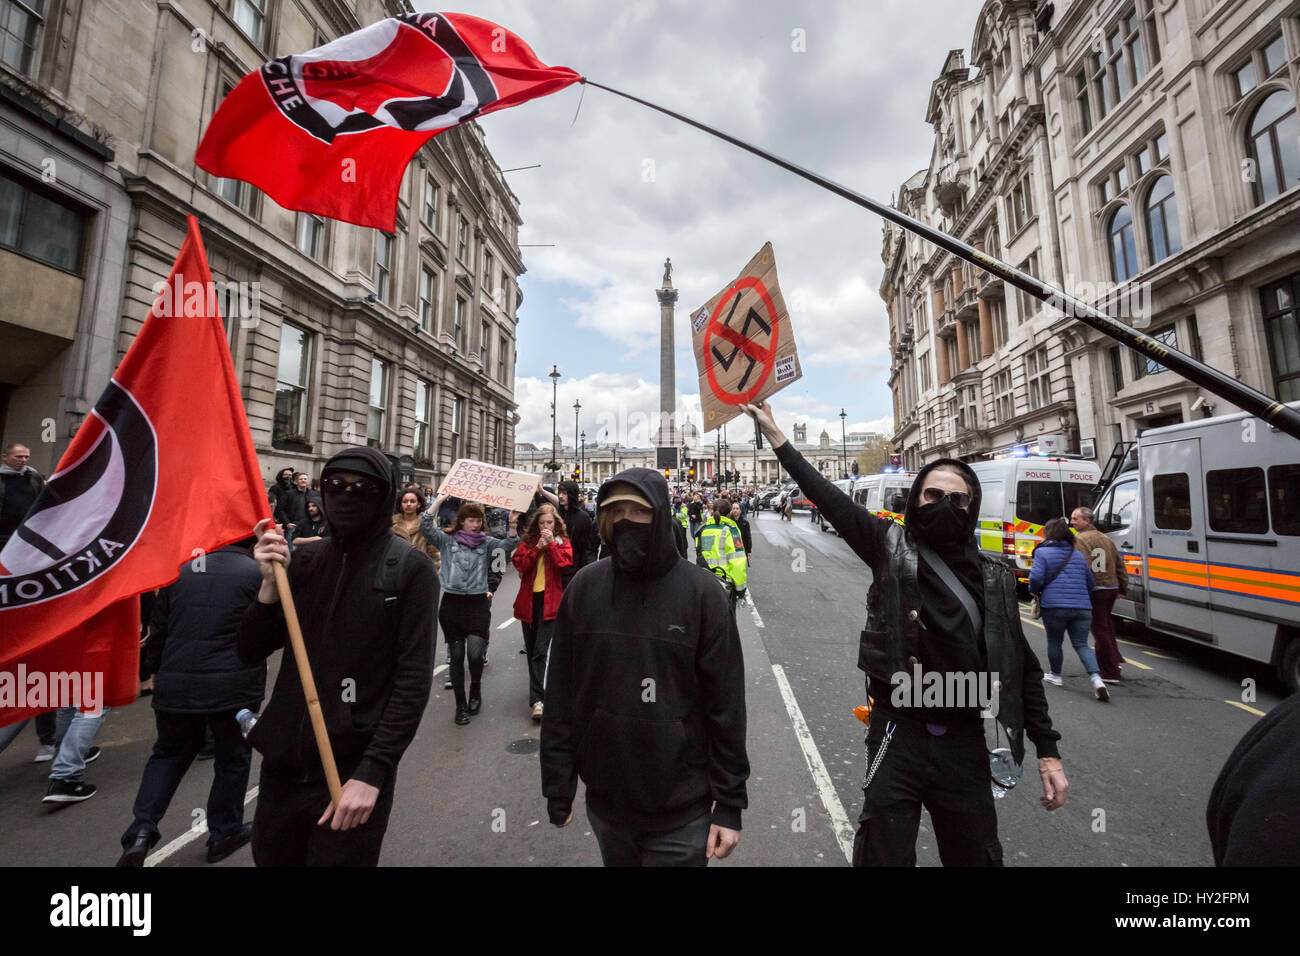 London, UK. 1st April, 2017. Anti-Fascist groups including Unite Against Fascism (UAF) clash with police with some arrests being made whilst counter-protesting far-right British nationalist groups including Britain First and the English Defence League (EDL) during their “march against terrorism” through central London in light of the recent terror attacks in Westminster. Police arrested 14 people during the clashes. © Guy Corbishley/Alamy Live News Stock Photo